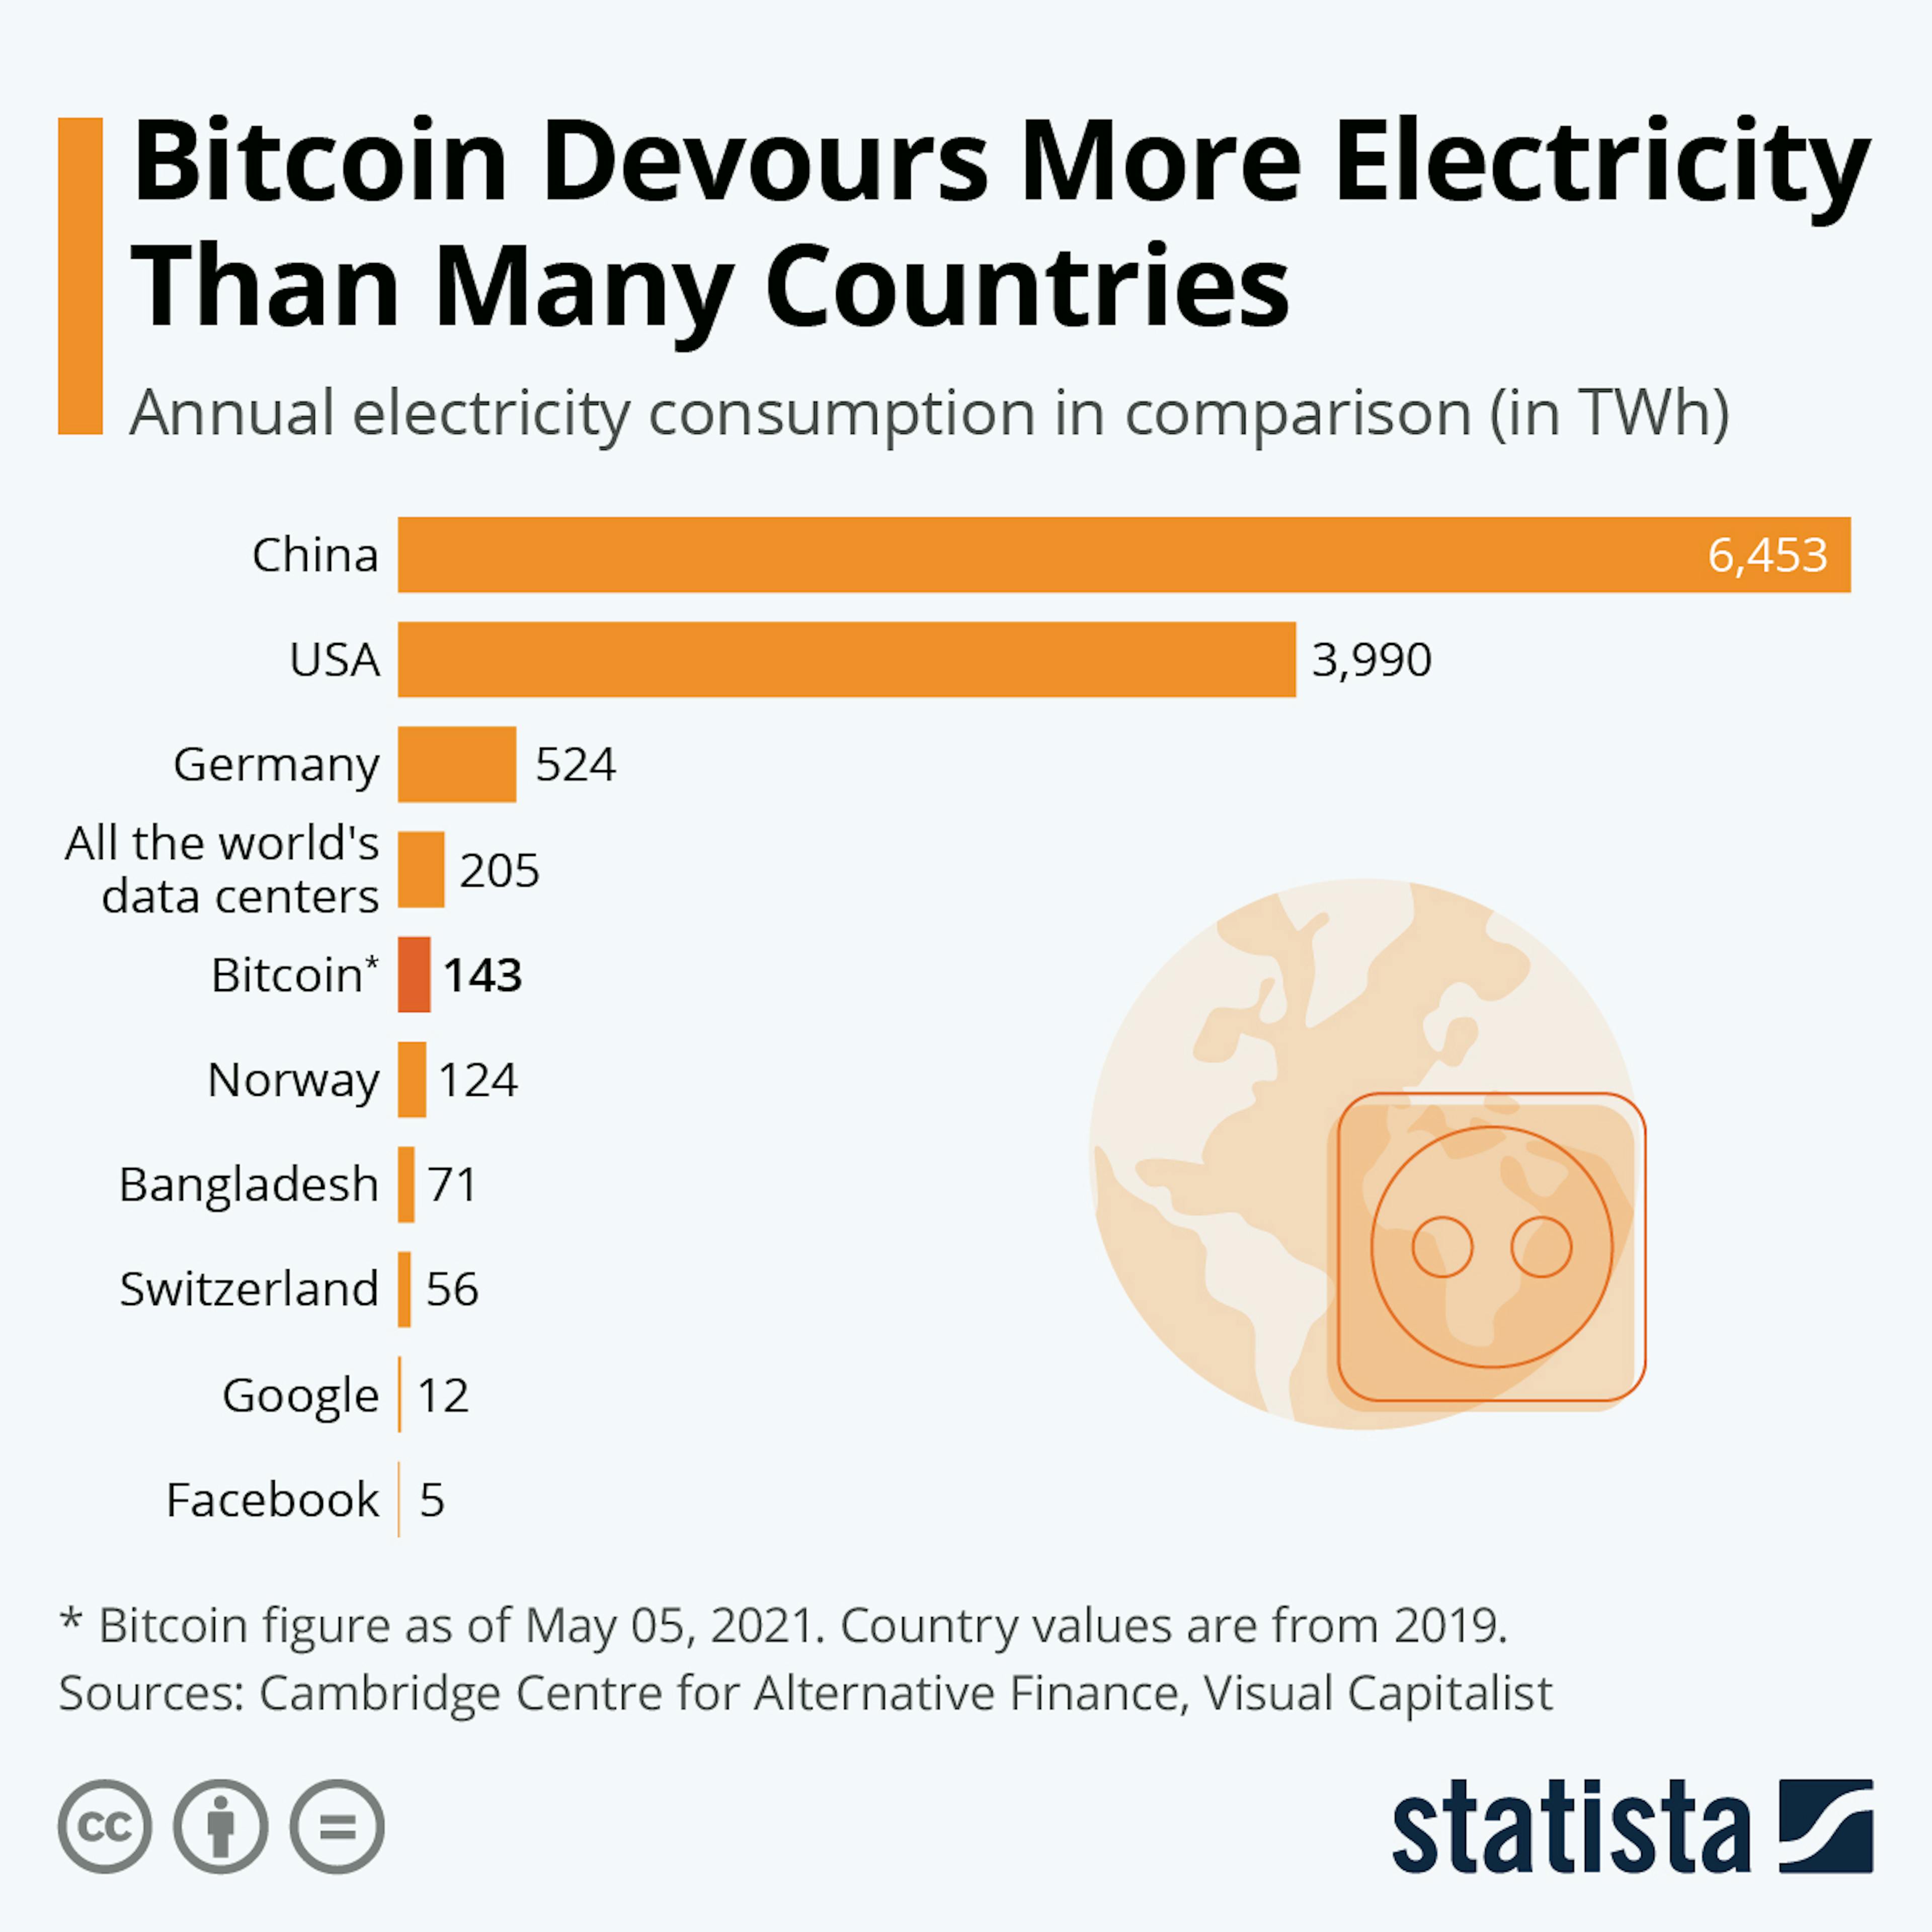 Bitcoin electricity compared with others. Source: Statista